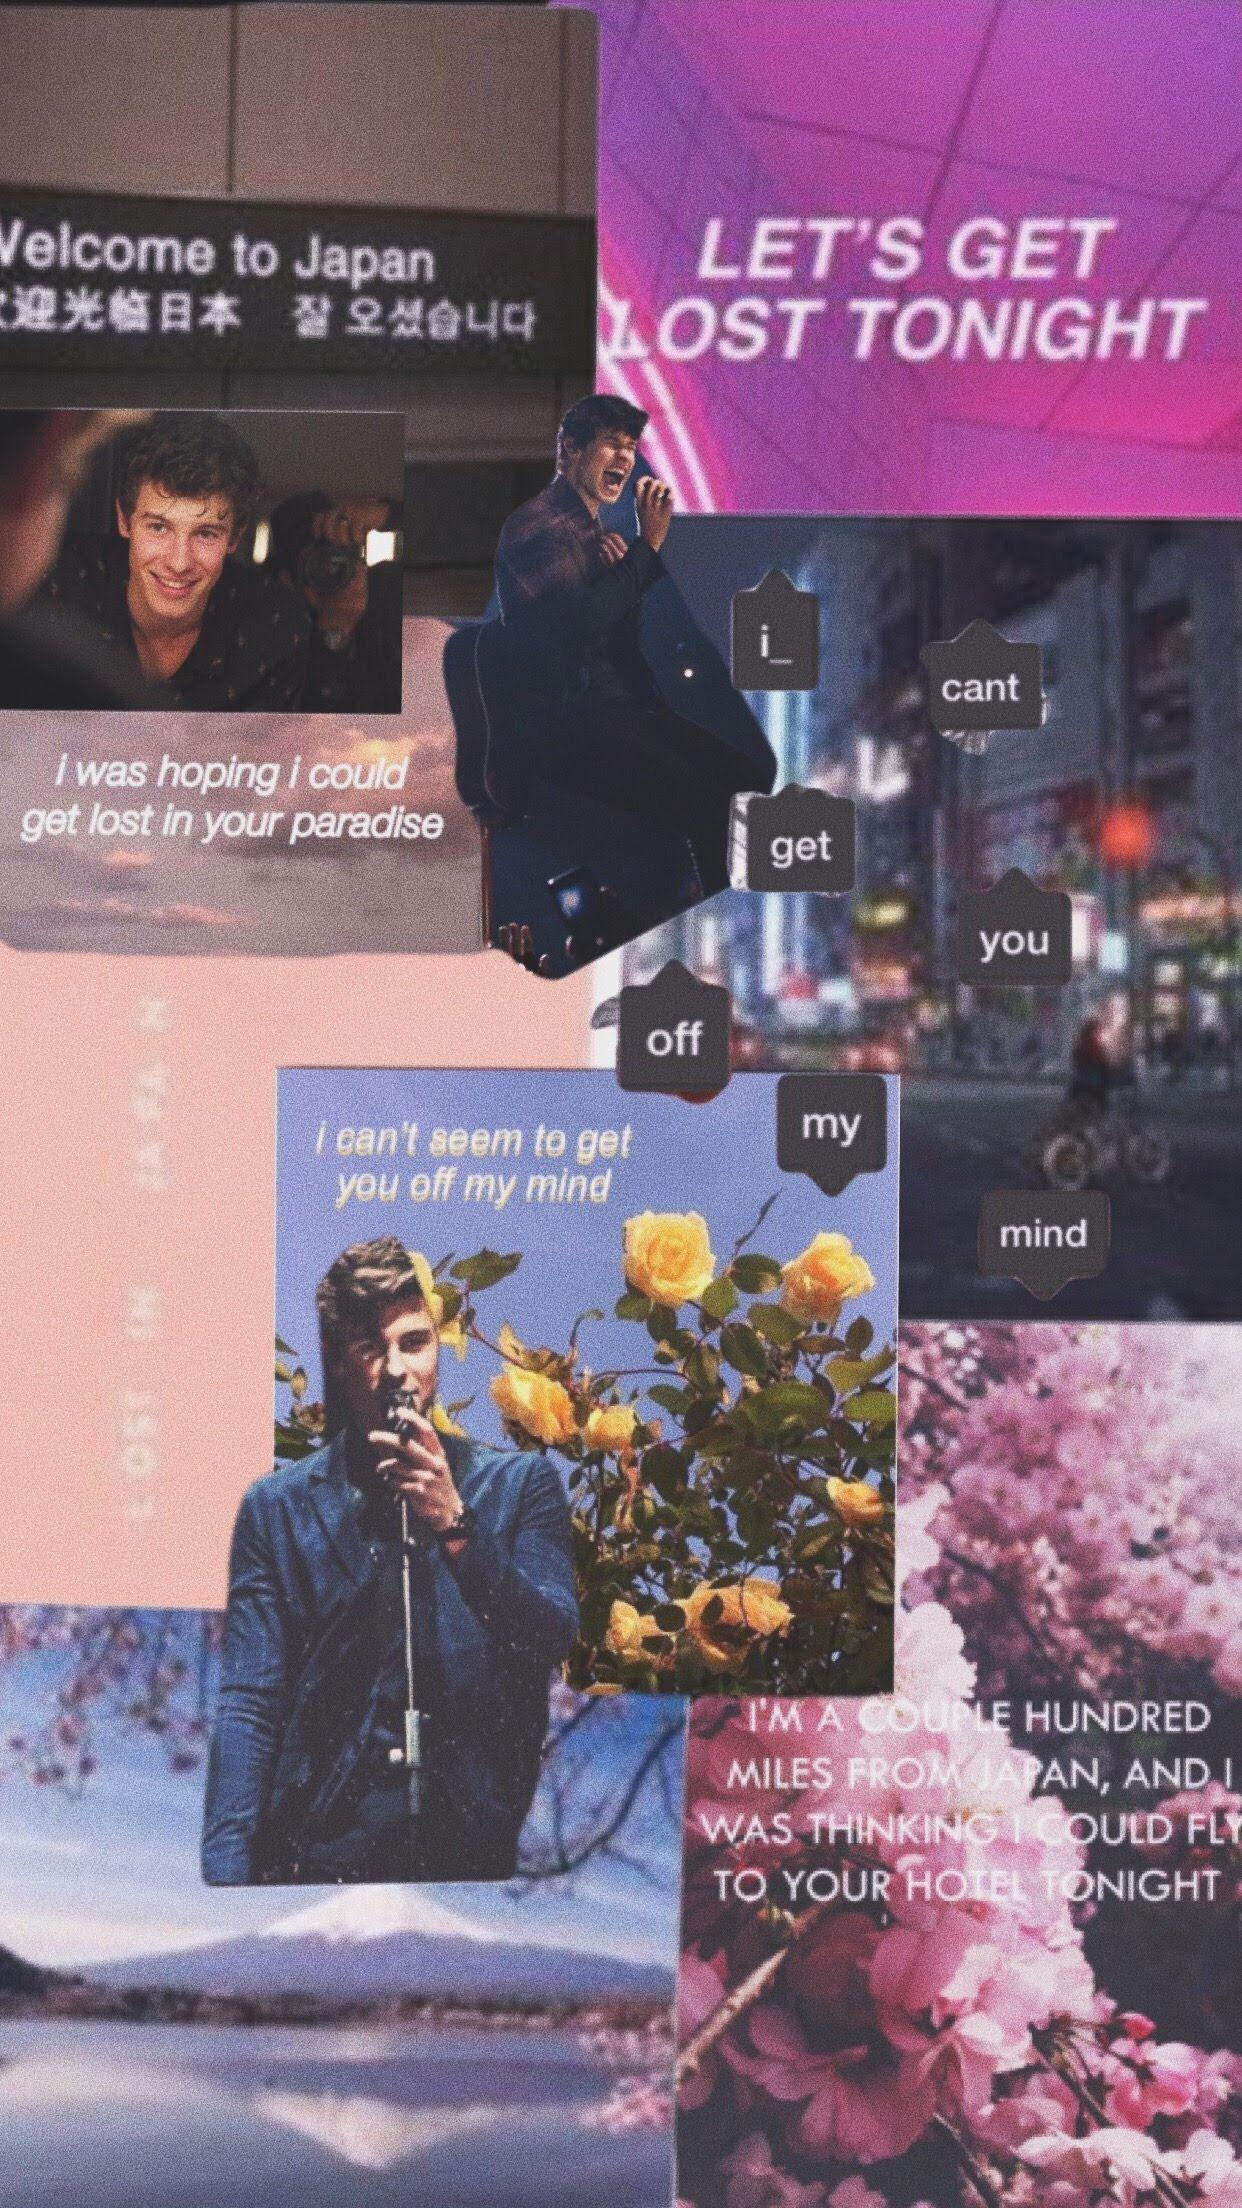 Shawn Mendes Aesthetic Wallpapers Wallpaper Cave 1:12 shawn mendes daily 64 979 prosmotrov. shawn mendes aesthetic wallpapers